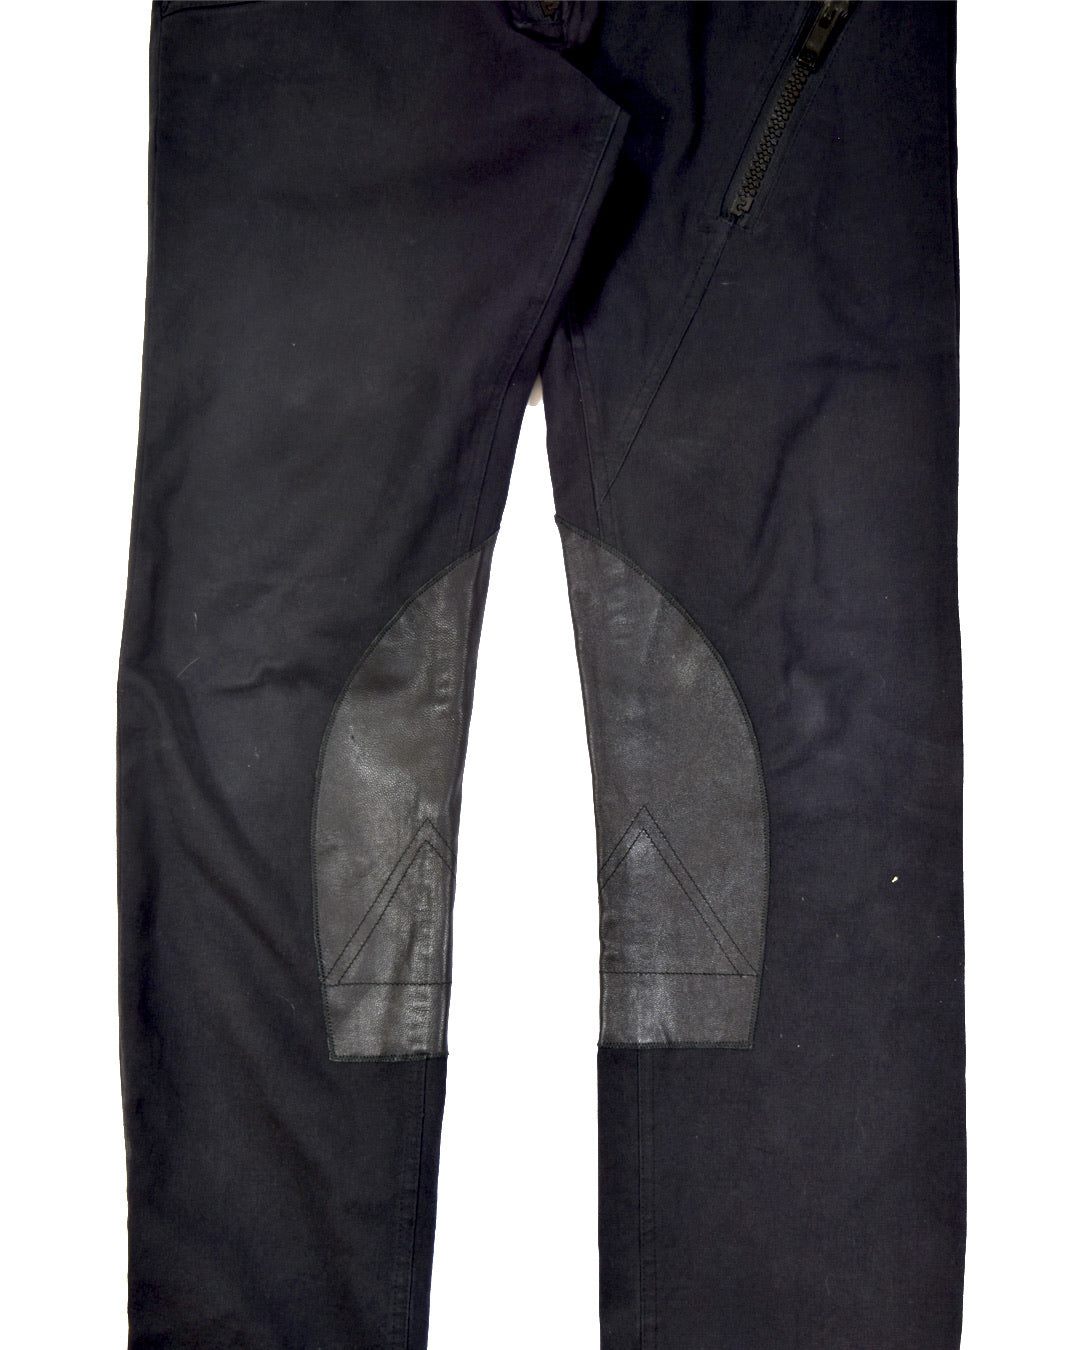 Raf Simons leather insert biker trousers S/S05 “History of the World”  46/30